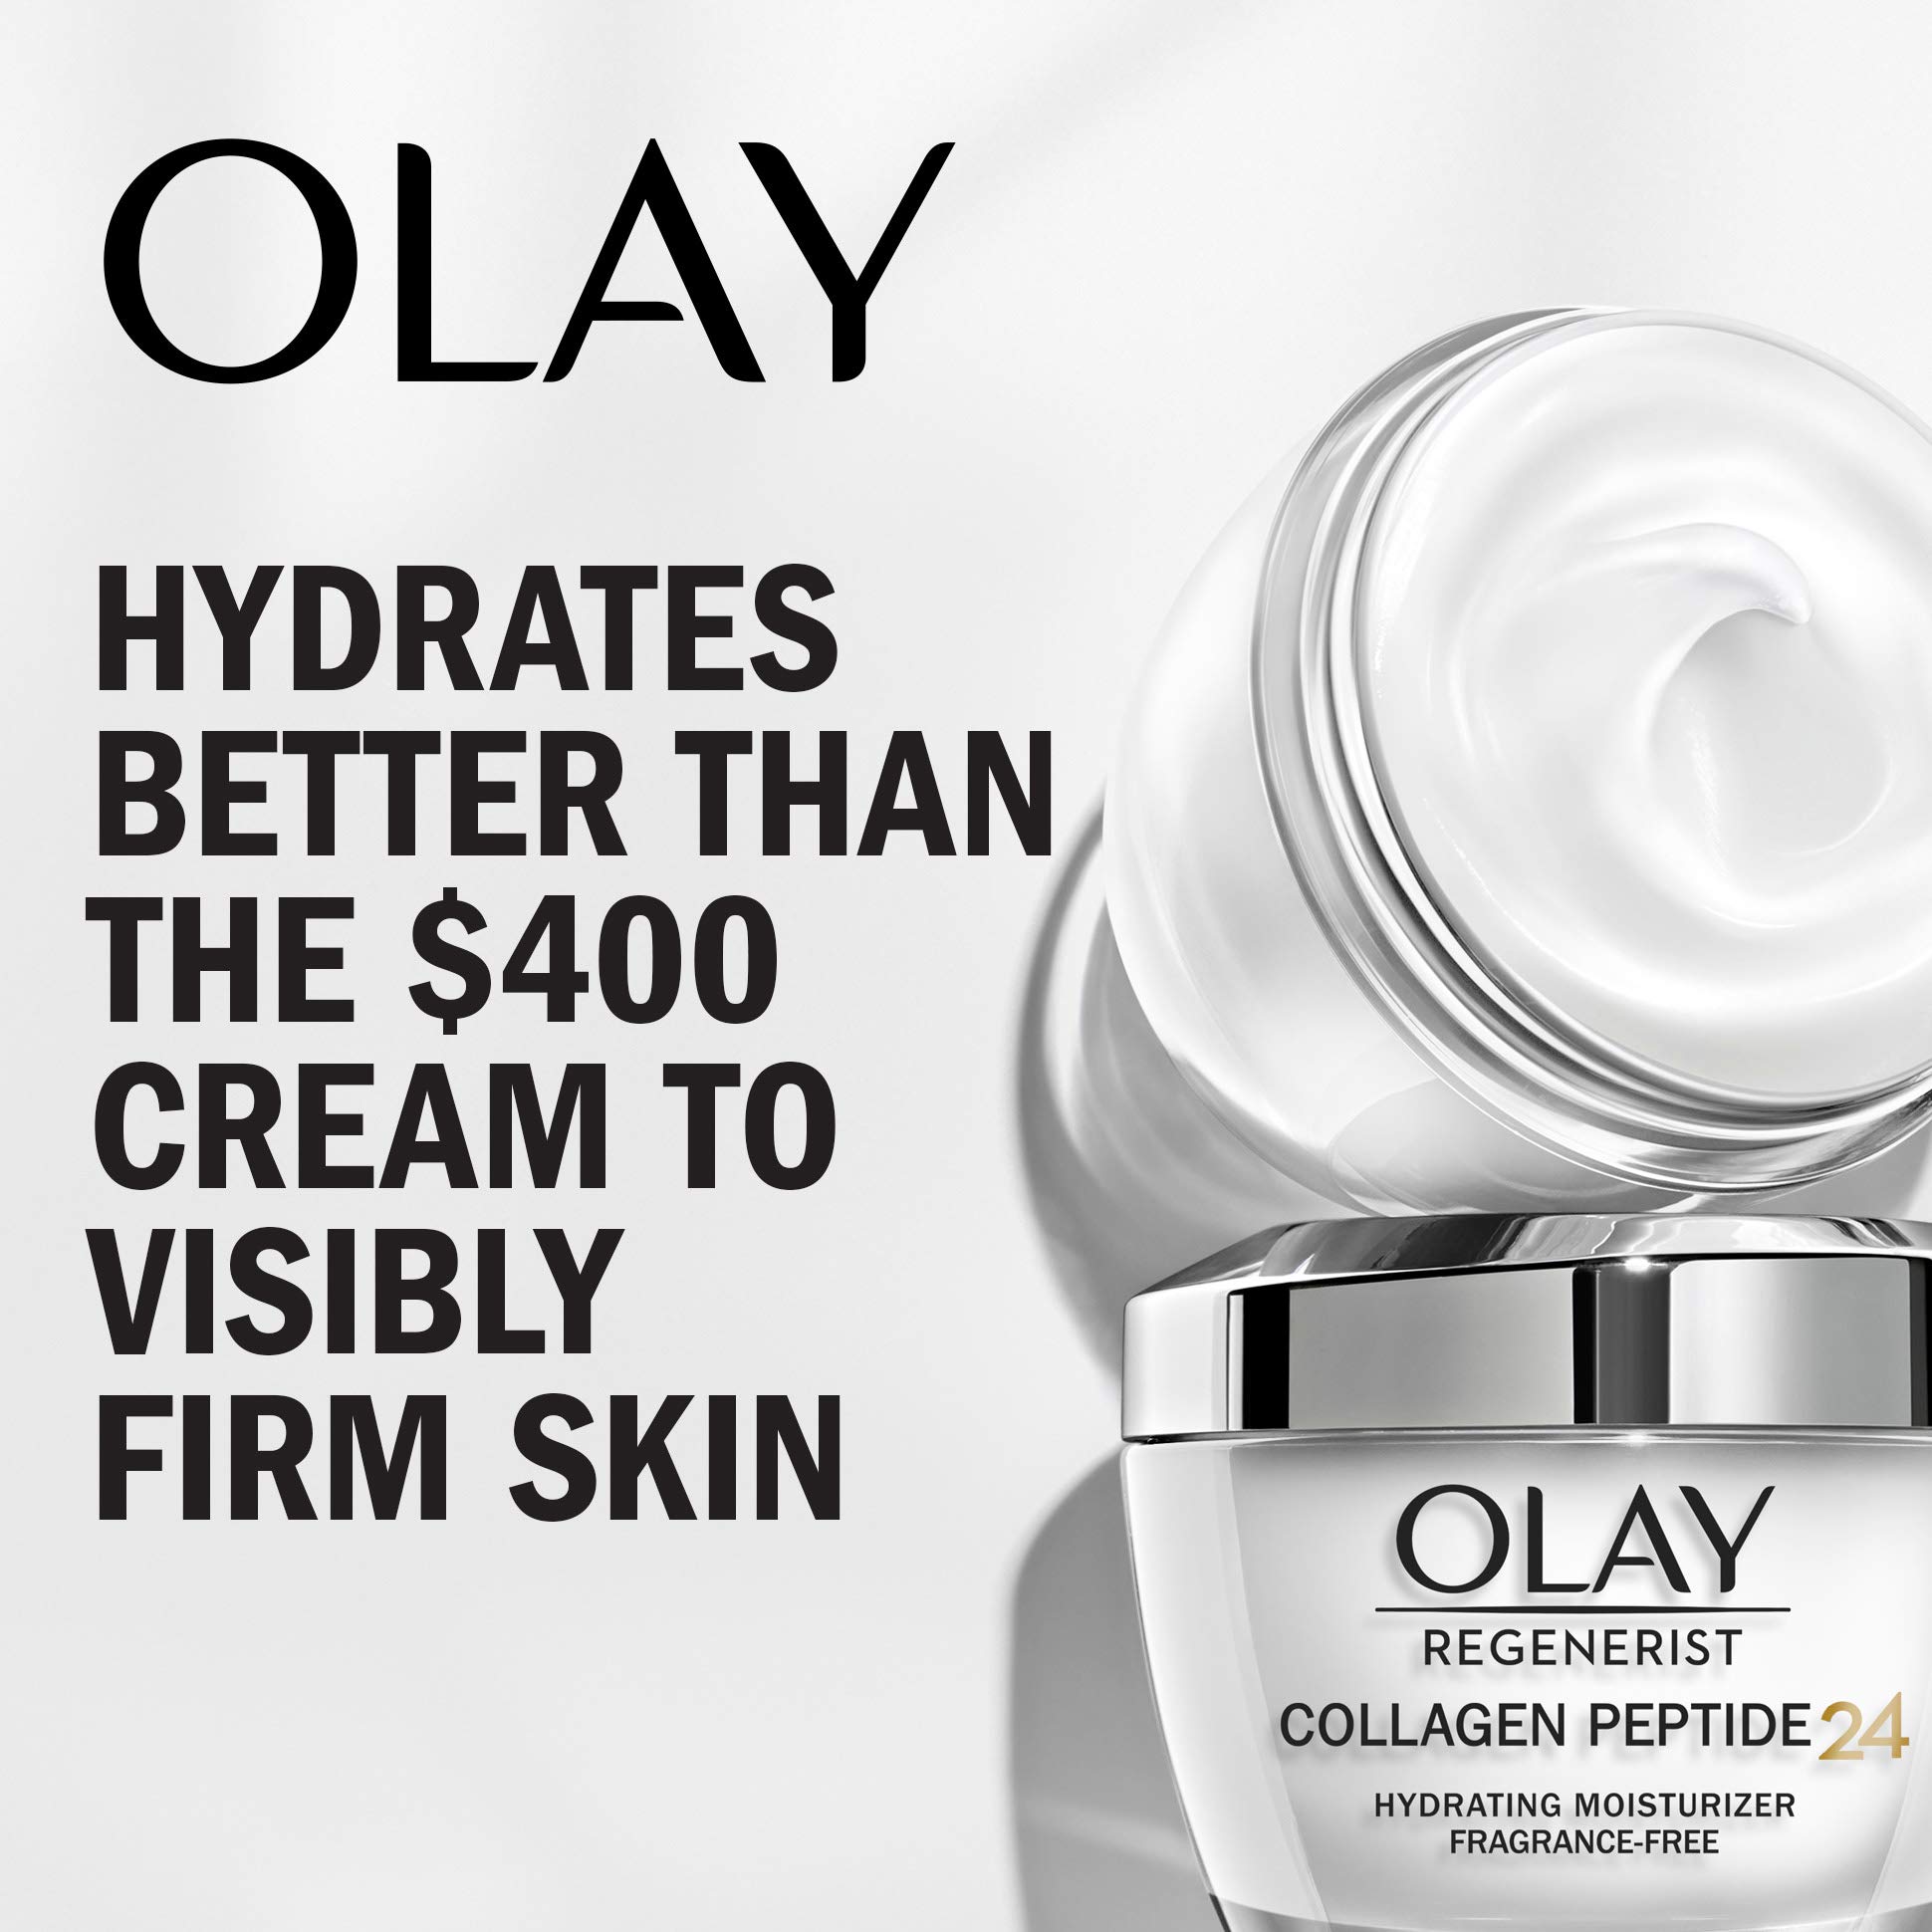 Olay Regenerist Collagen Peptide 24 Face Moisturizer Cream with Niacinamide for Firmer Skin, Anti-Wrinkle Fragrance-Free 1.7 oz, Includes Olay Whip Travel Size for Dry Skin